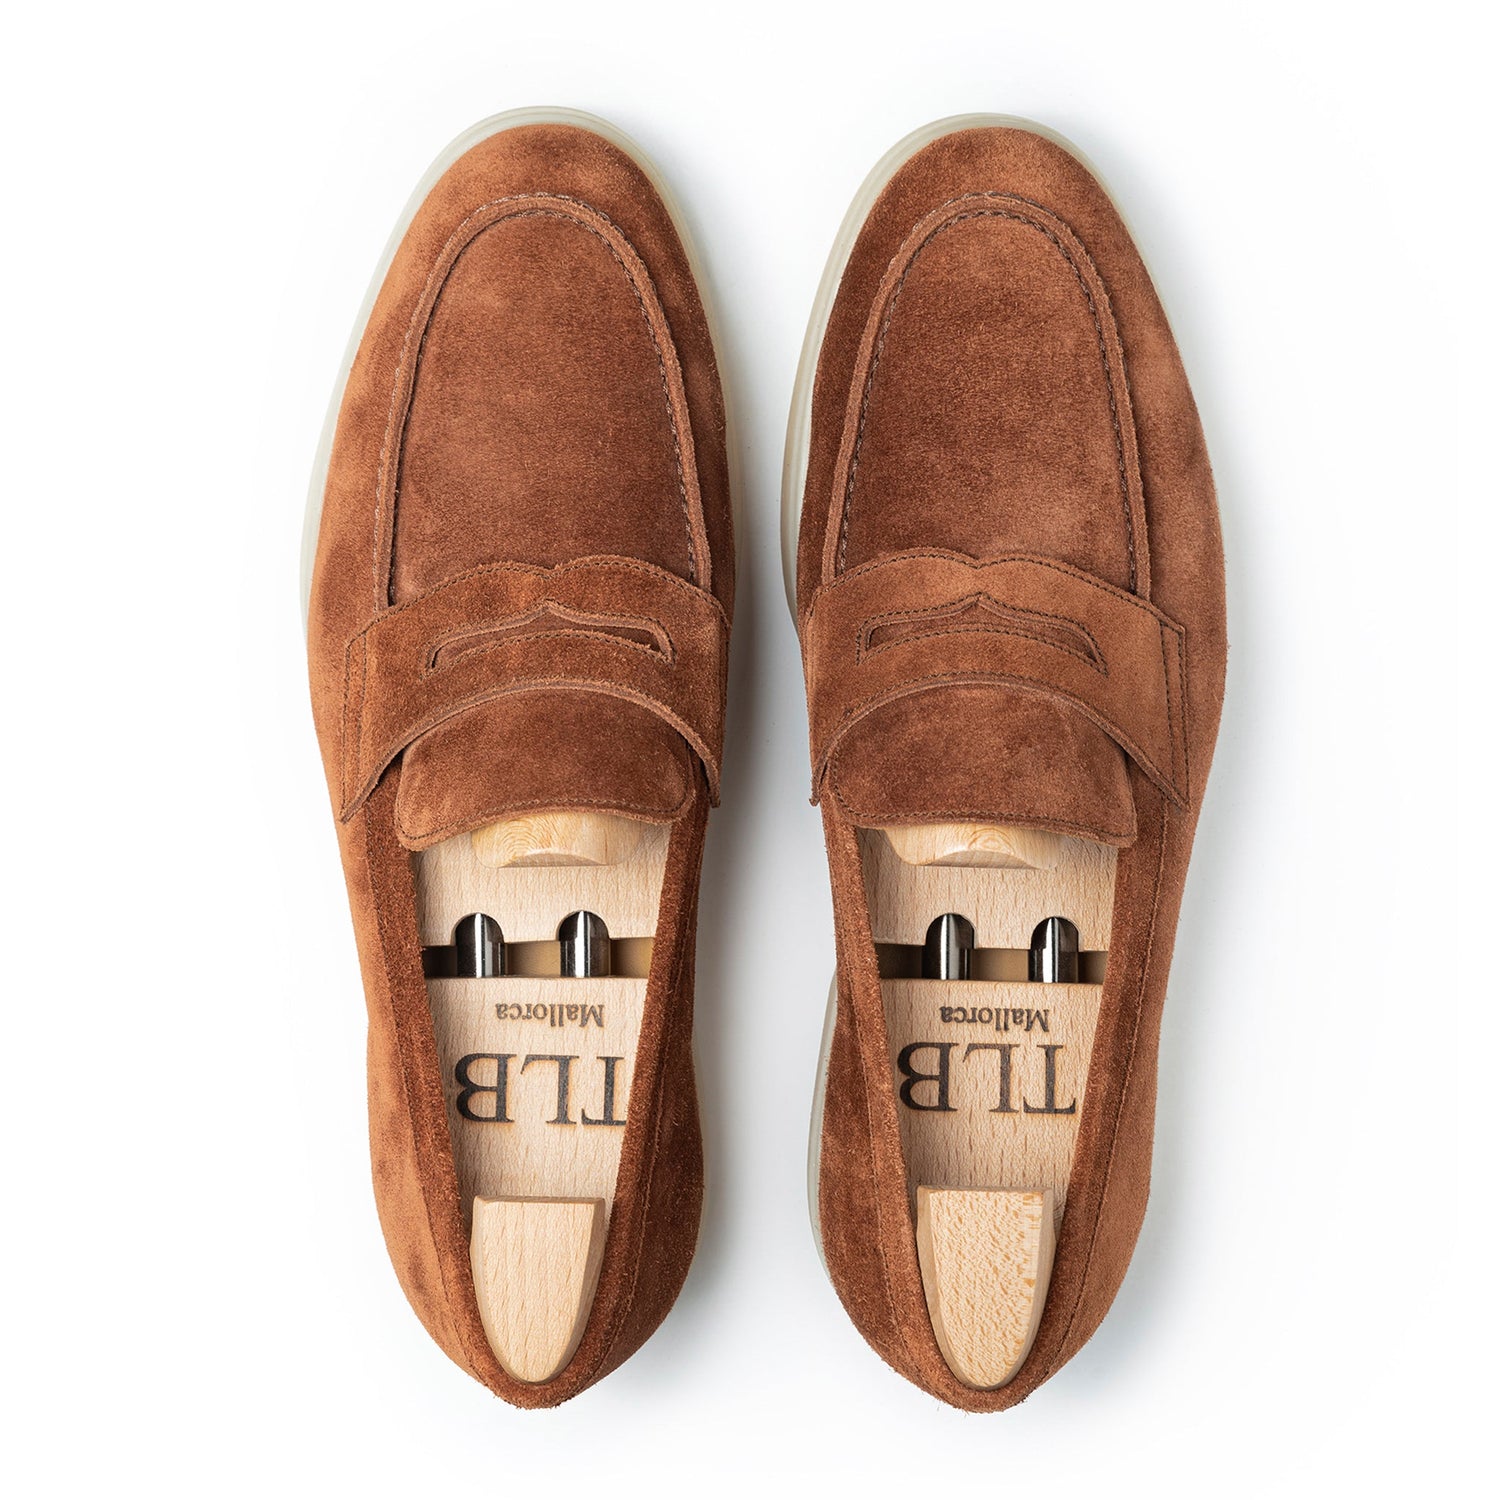 TLB Mallorca leather shoes - Men's loafers 